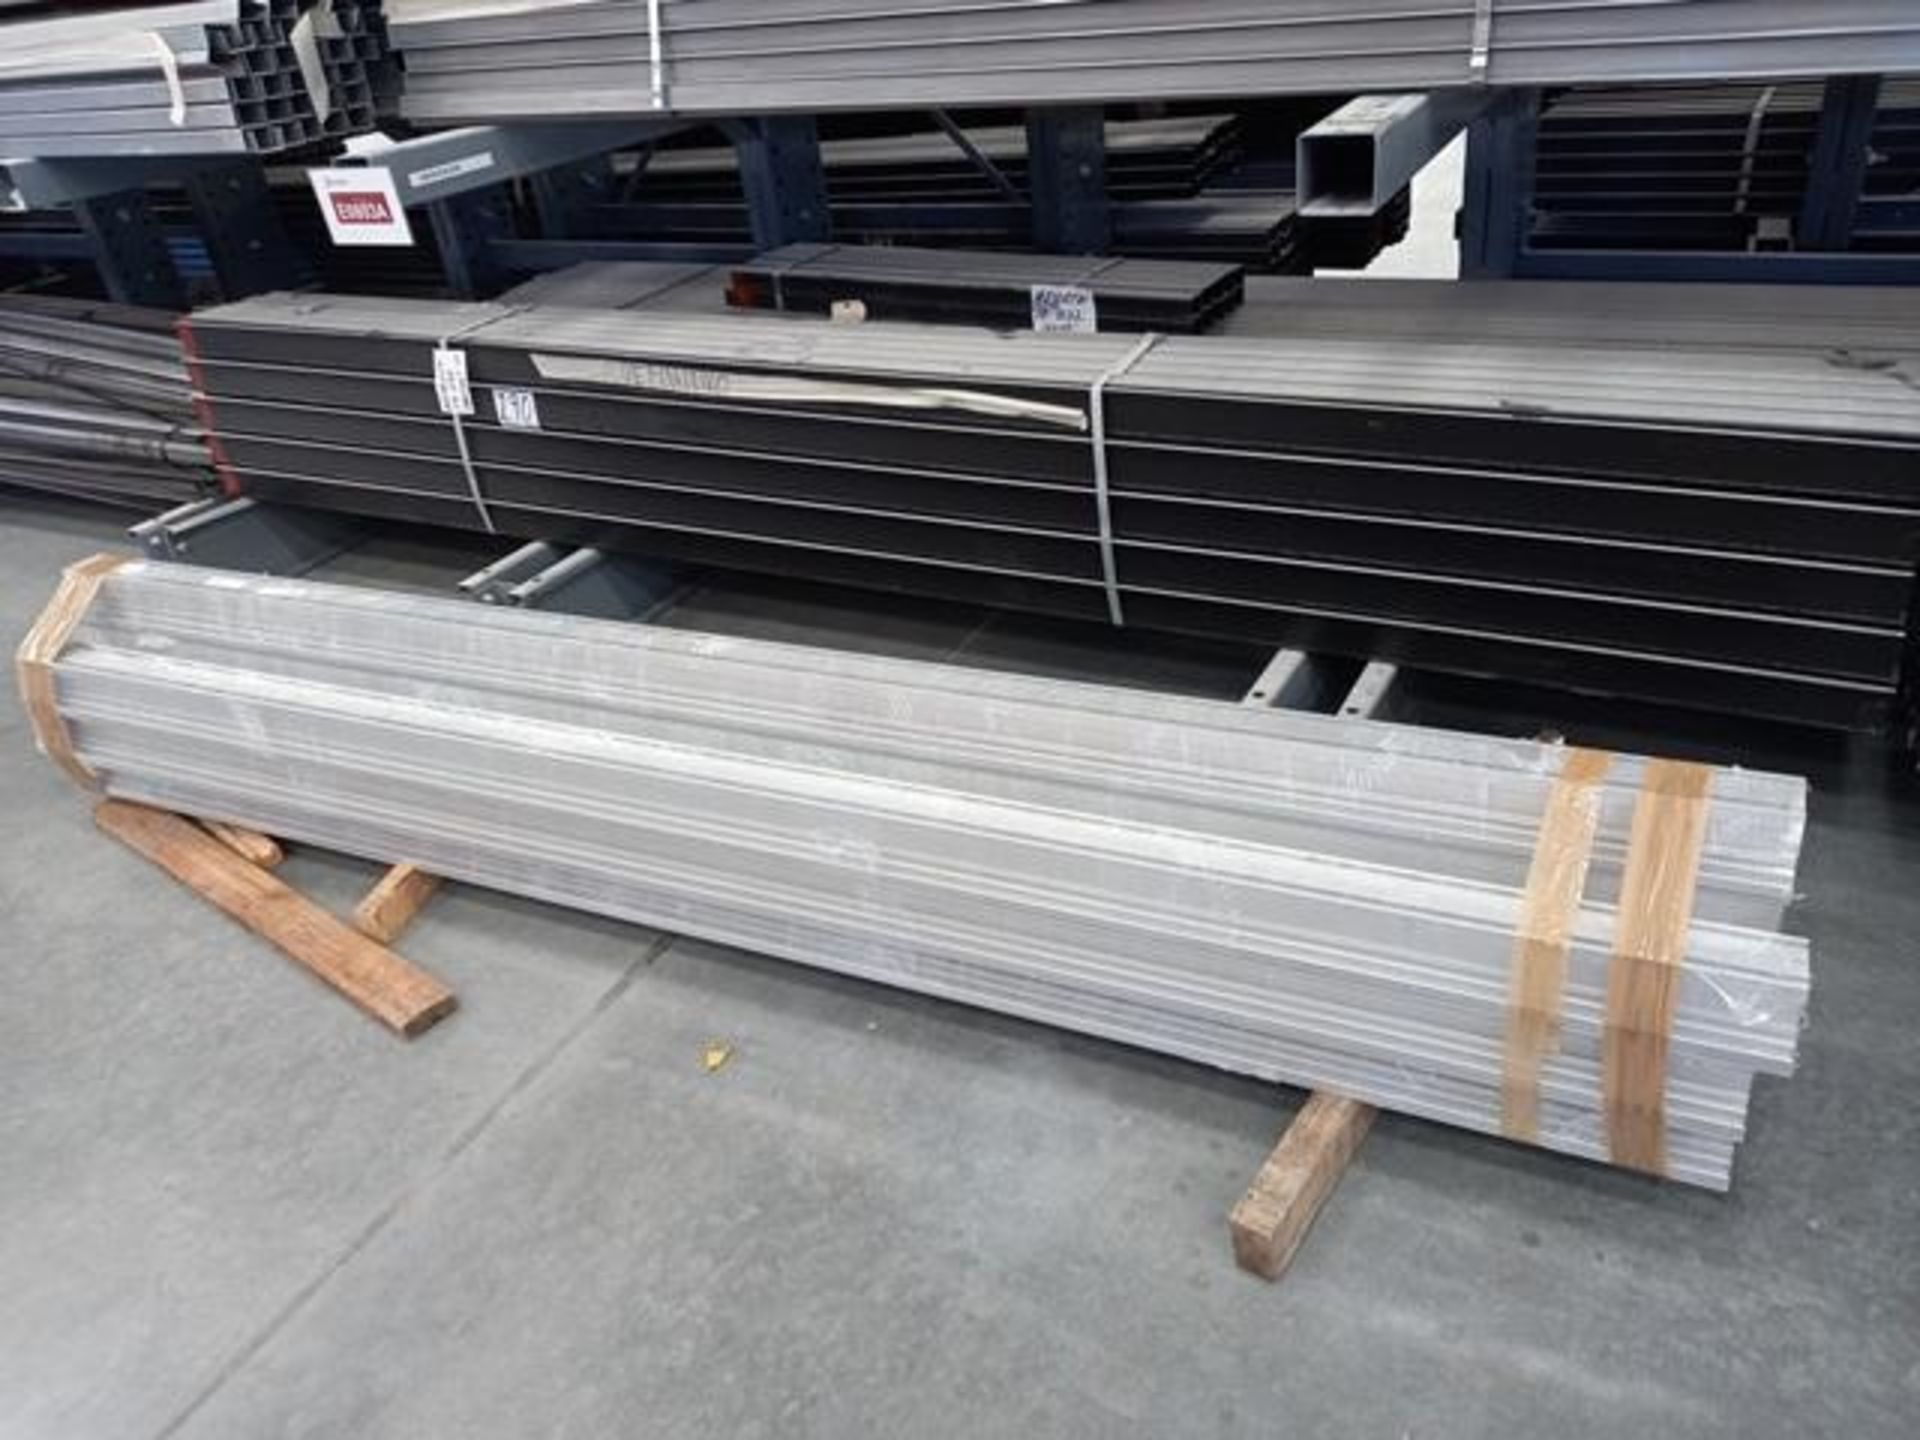 LOT: Assorted Metallic Material: (100) Pieces Of Gux Ipd Leg Steel - Blktx, 7-0, (156) Pieces Of